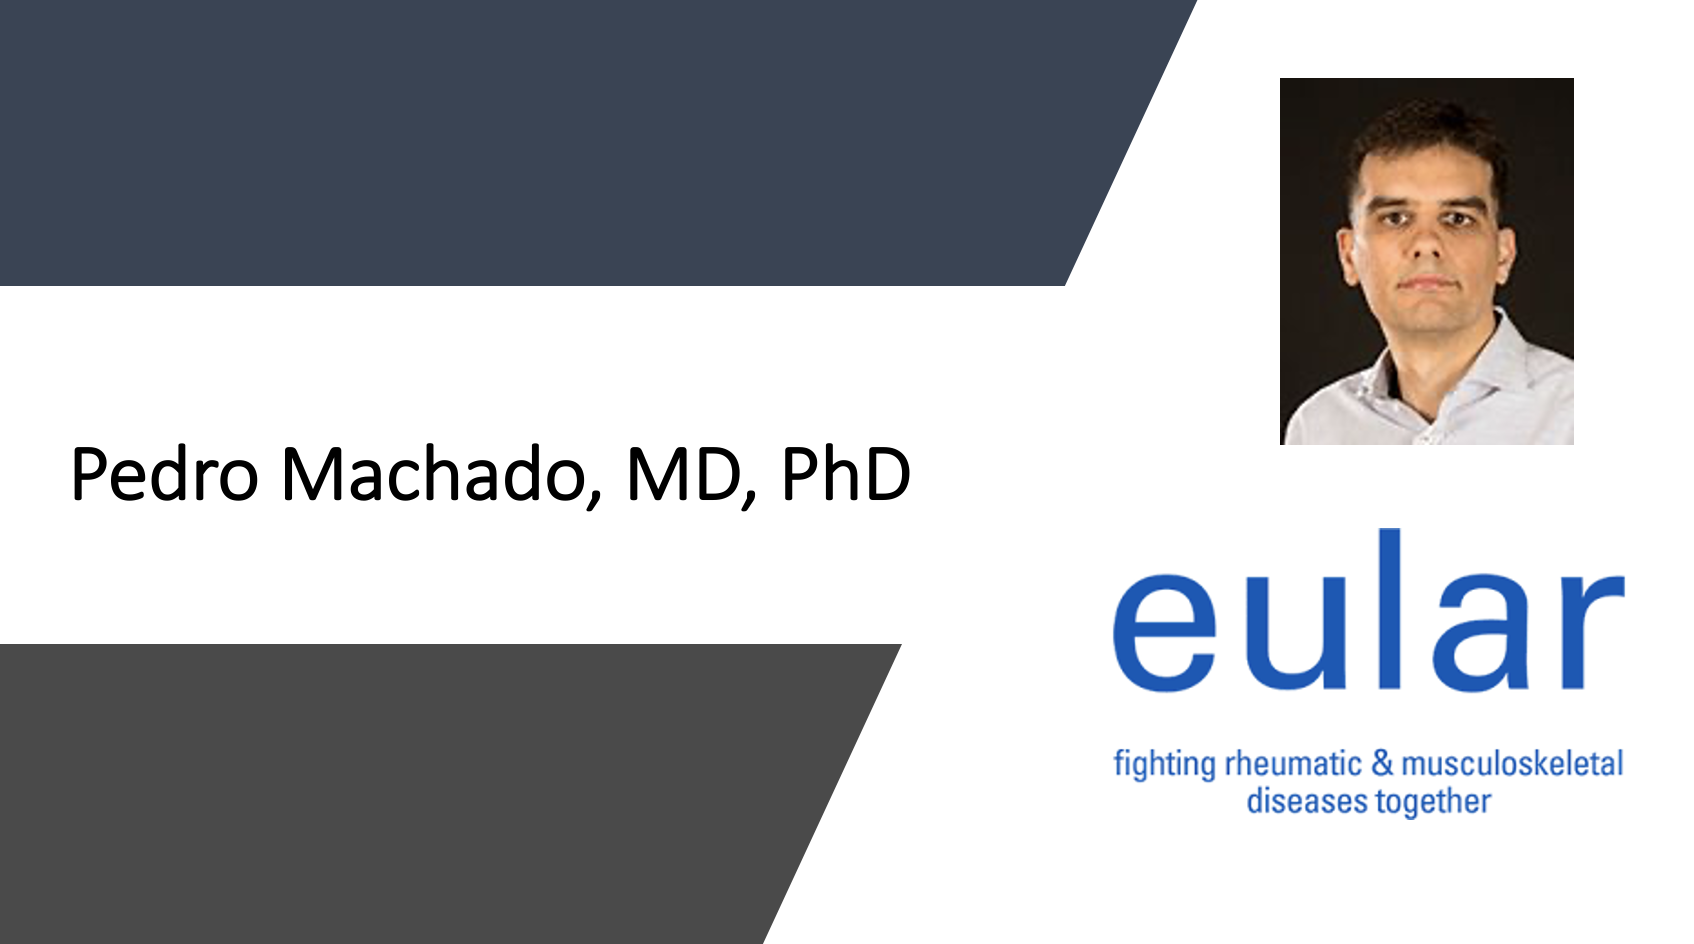 Pedro Machado, MD, PhD: COVID-19 Vaccine Safety in Patients With Rheumatic and Musculoskeletal Disease